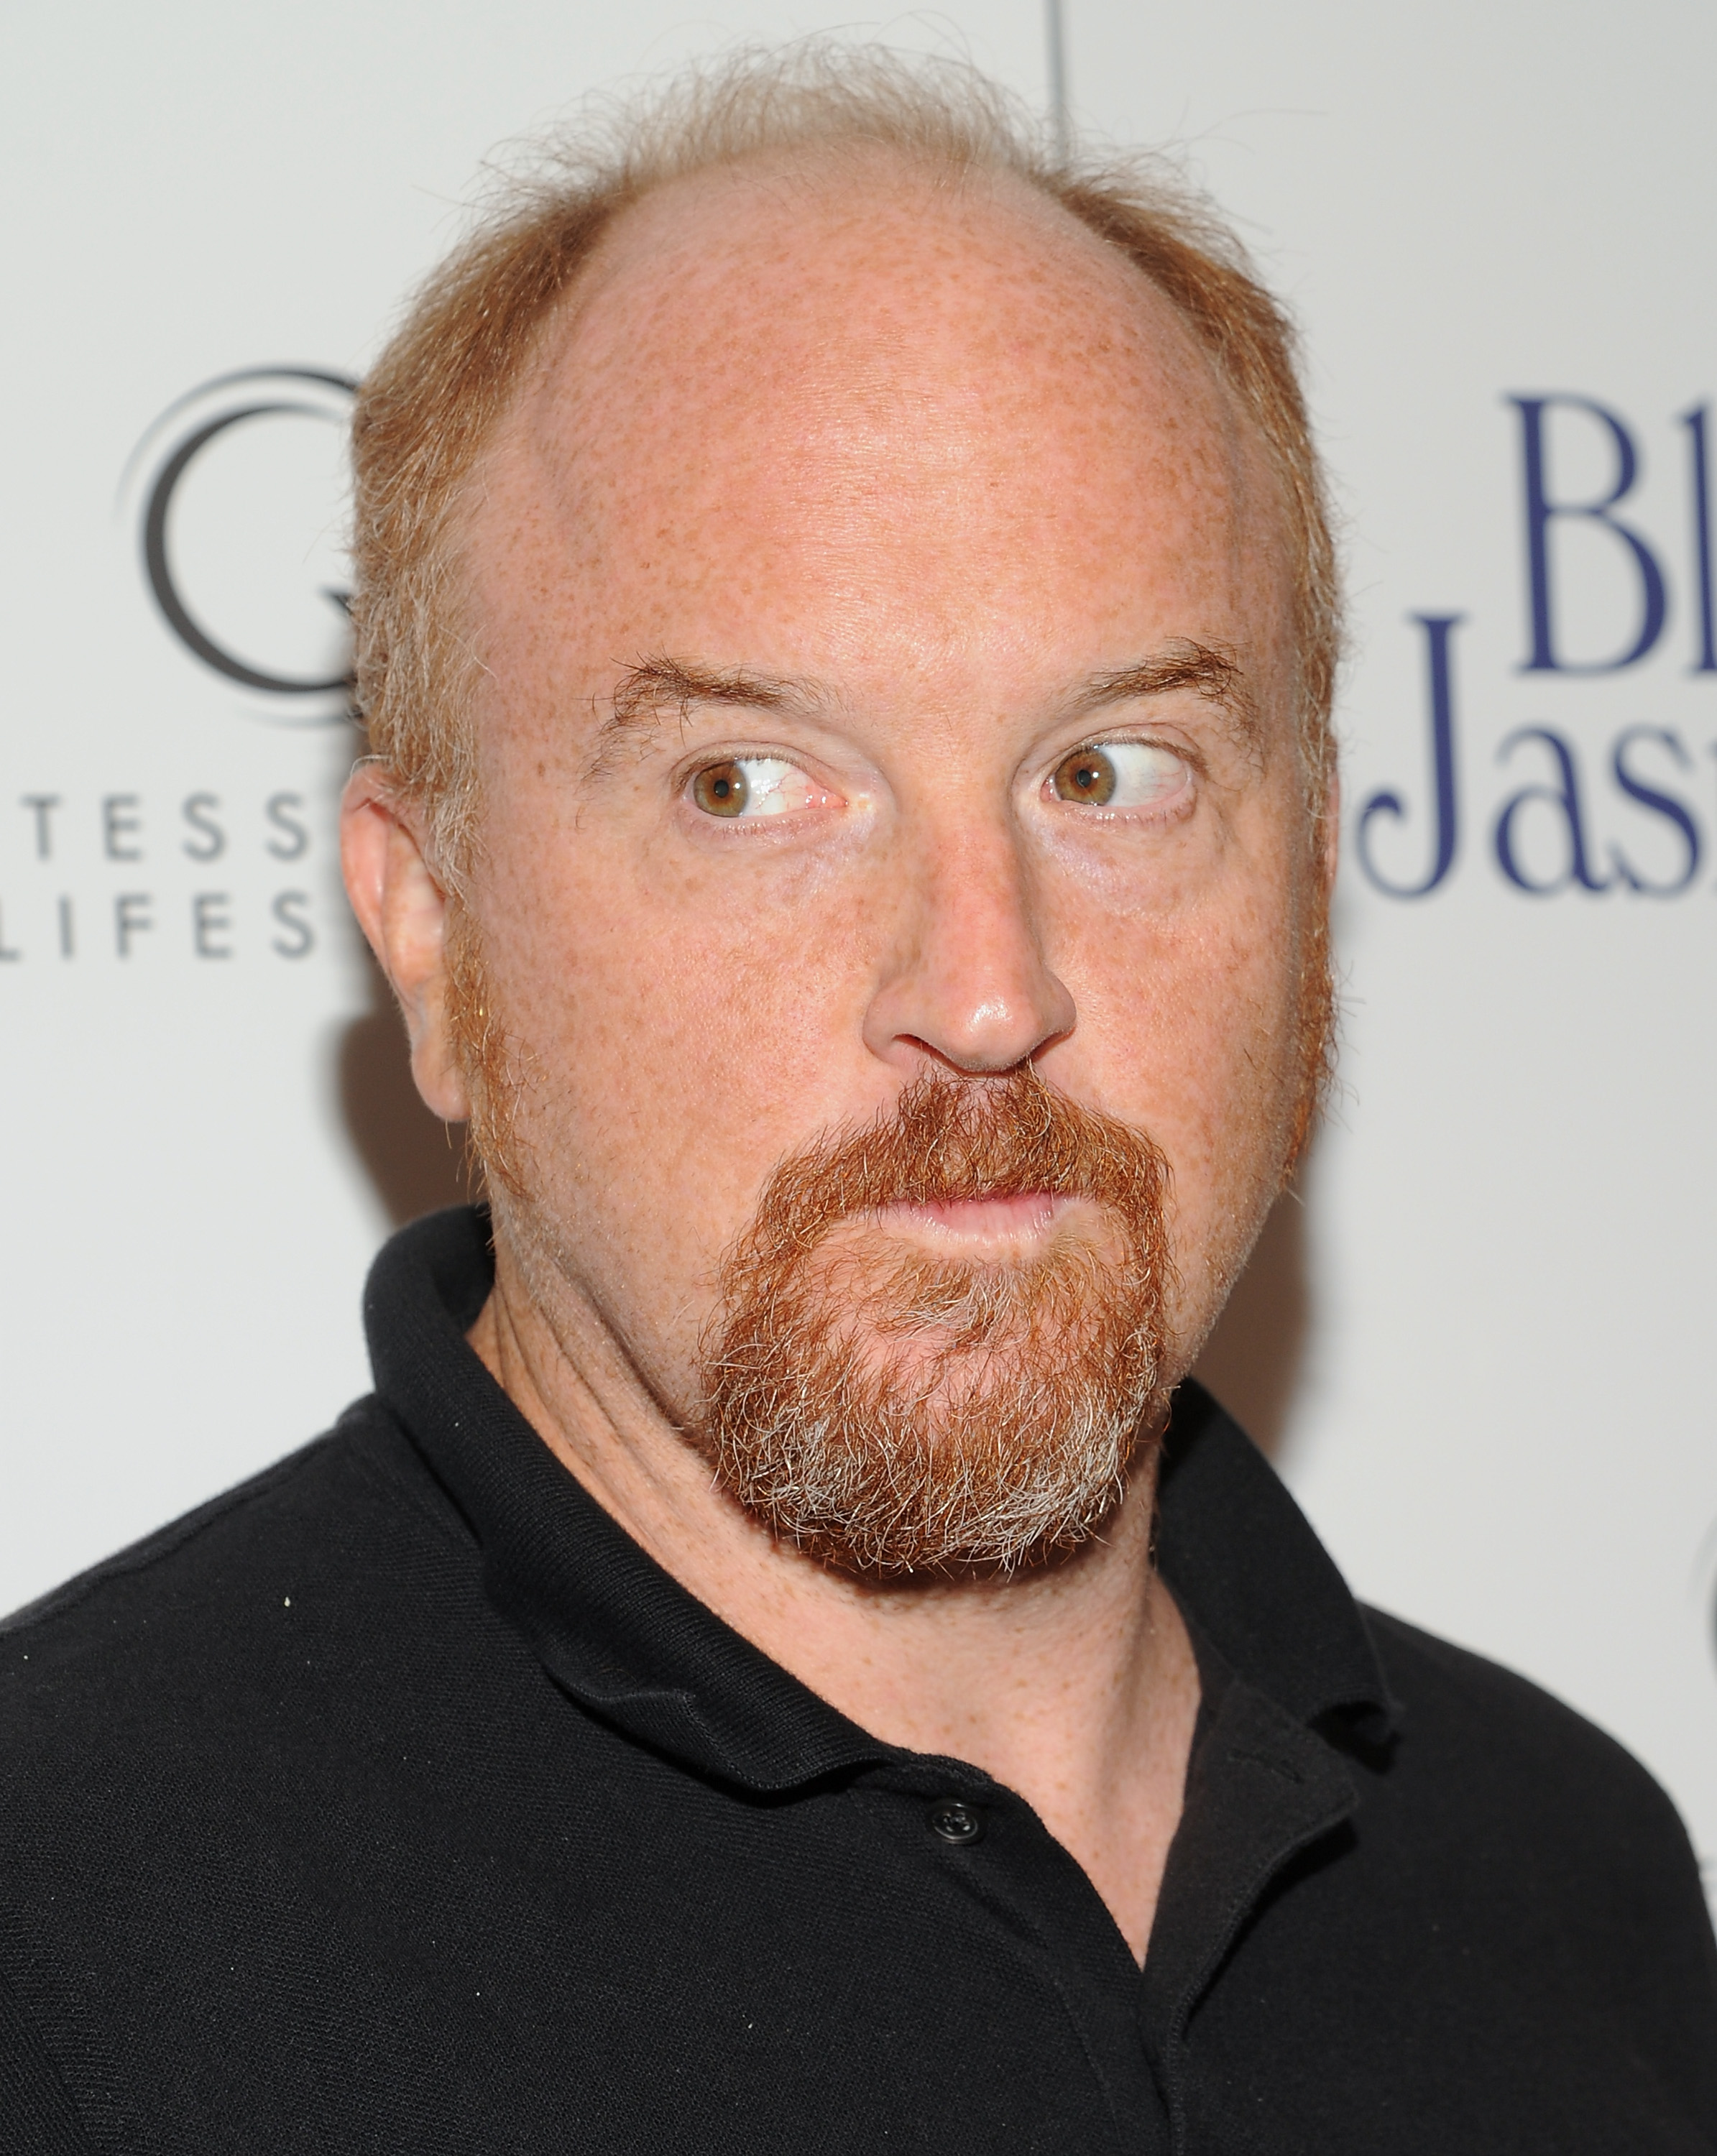 Louis C.K. attends the premiere of "Blue Jasmine" at the Museum of Modern Art on July 22, 2013 in New York City.